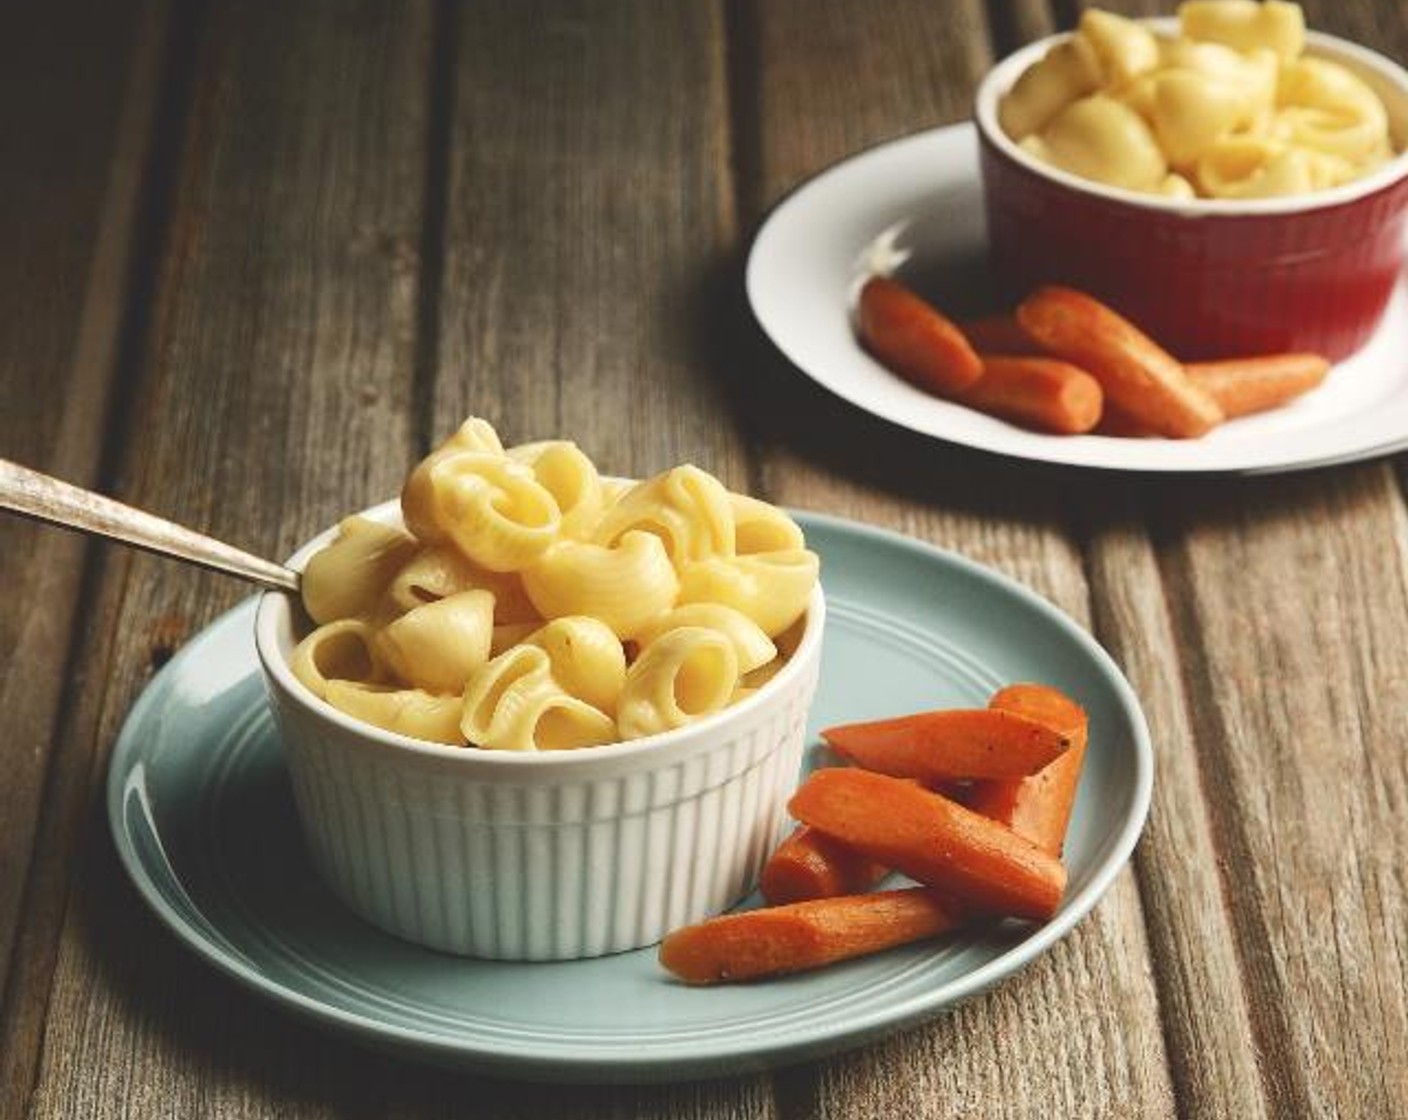 The Classic Kids Mac n Cheese with Glazed Carrots